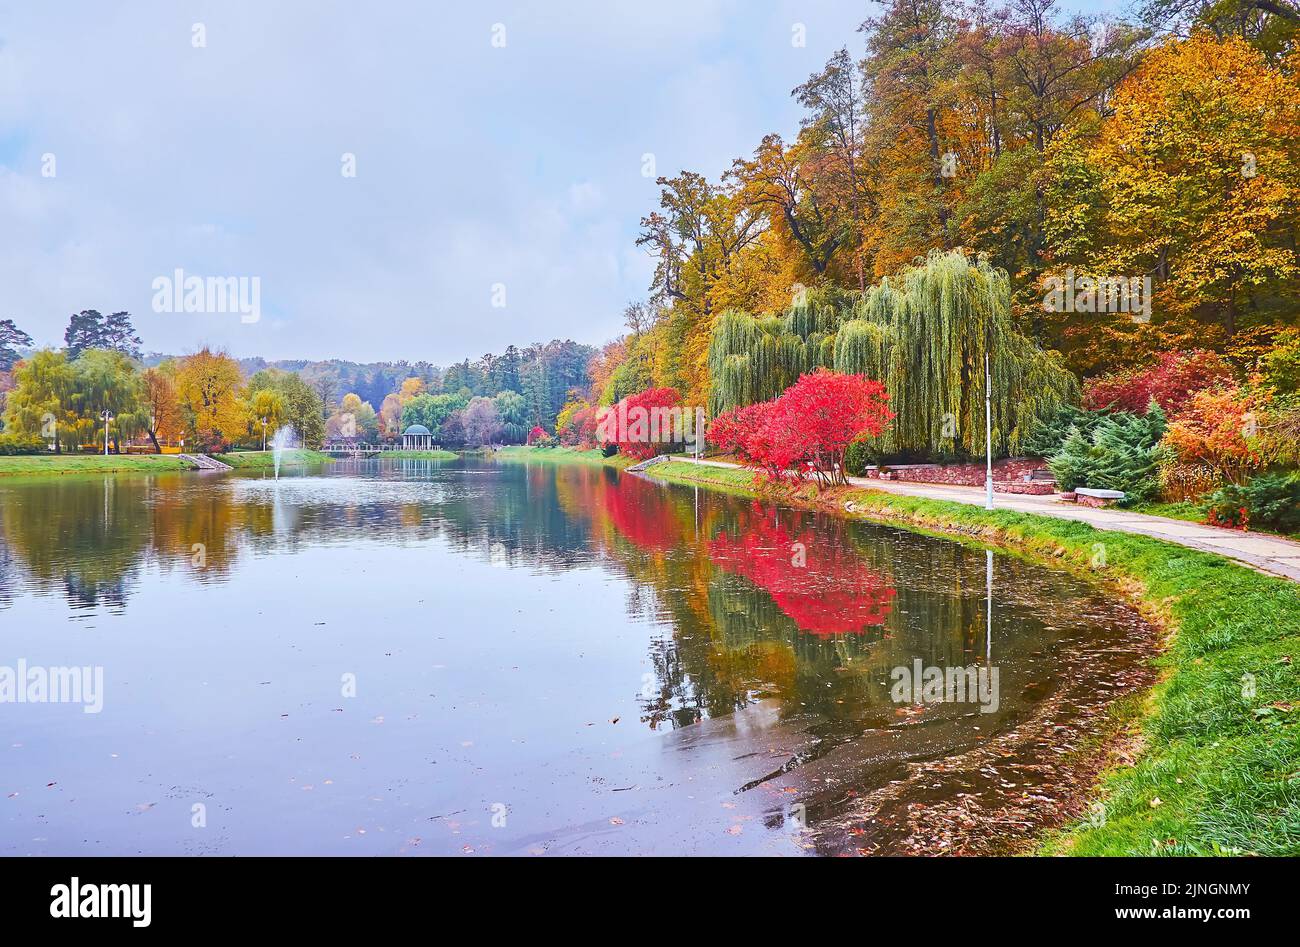 The scenic autumn Feofania park with Palladin pond with a fountain and a small gazebo in background, Kyiv, Ukraine Stock Photo